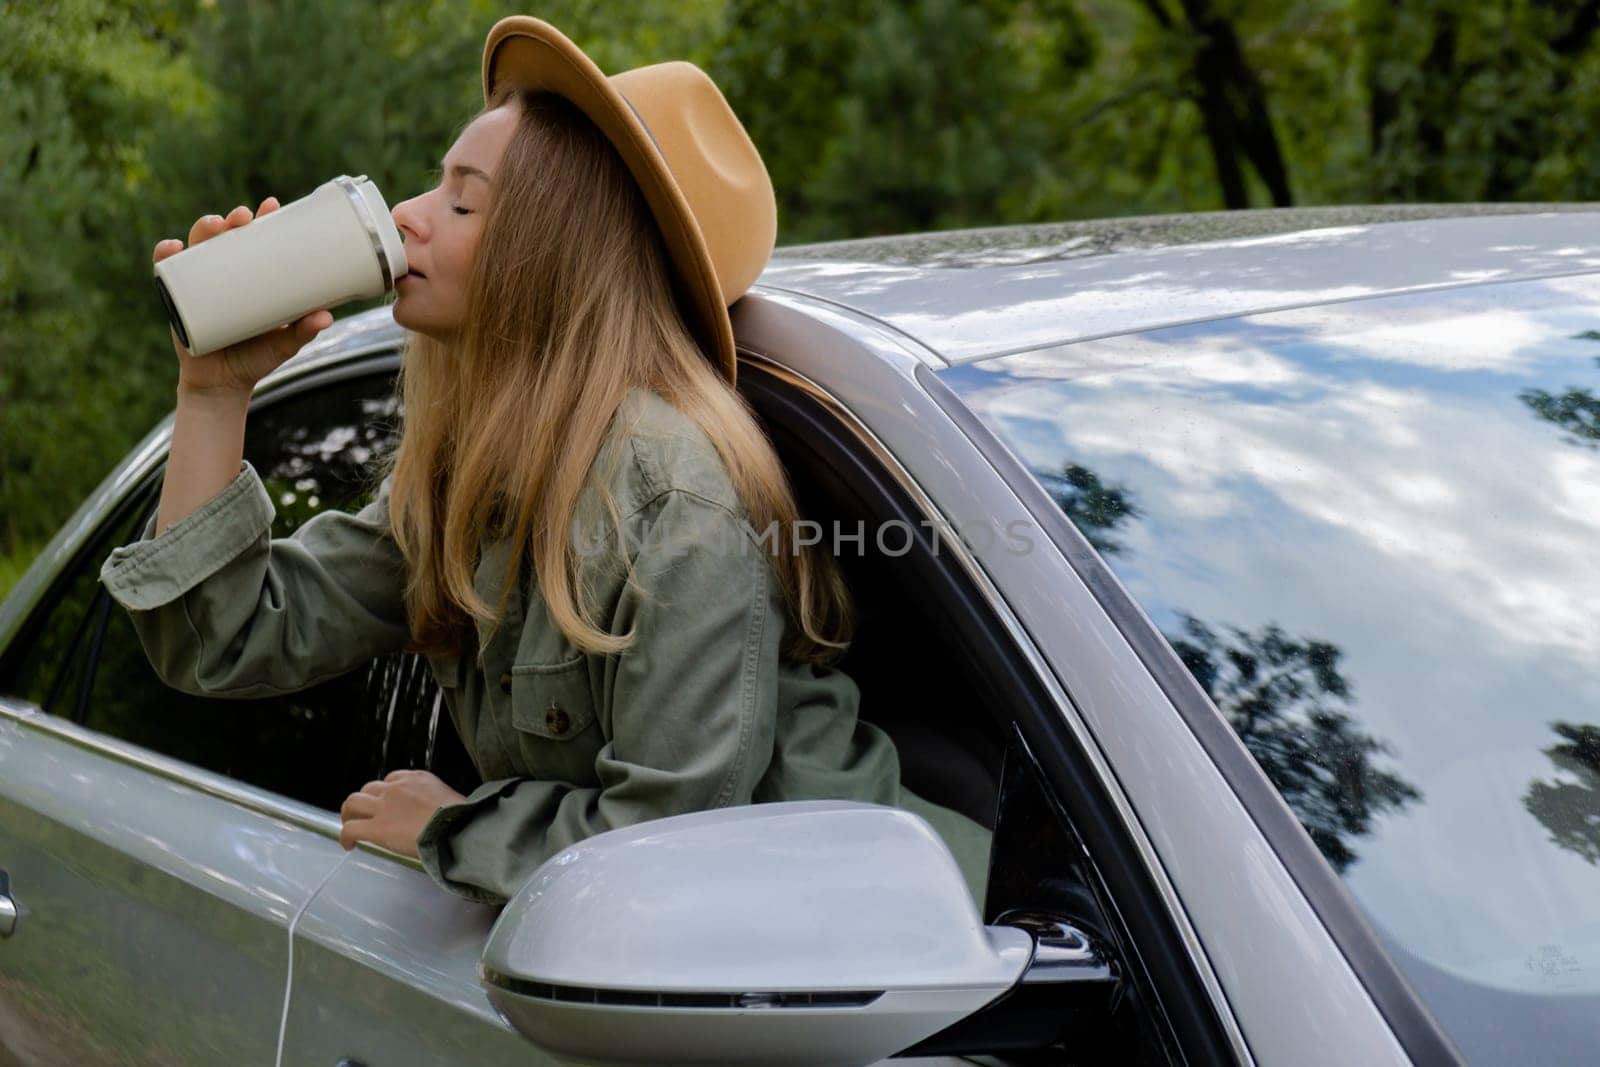 Smiling young woman looking from car window and drinking coffee or tea from reusable thermos cup. Local solo travel on weekends concept. Exited woman explore freedom outdoors in forest. Unity with nature lifestyle, rest recharge relaxation